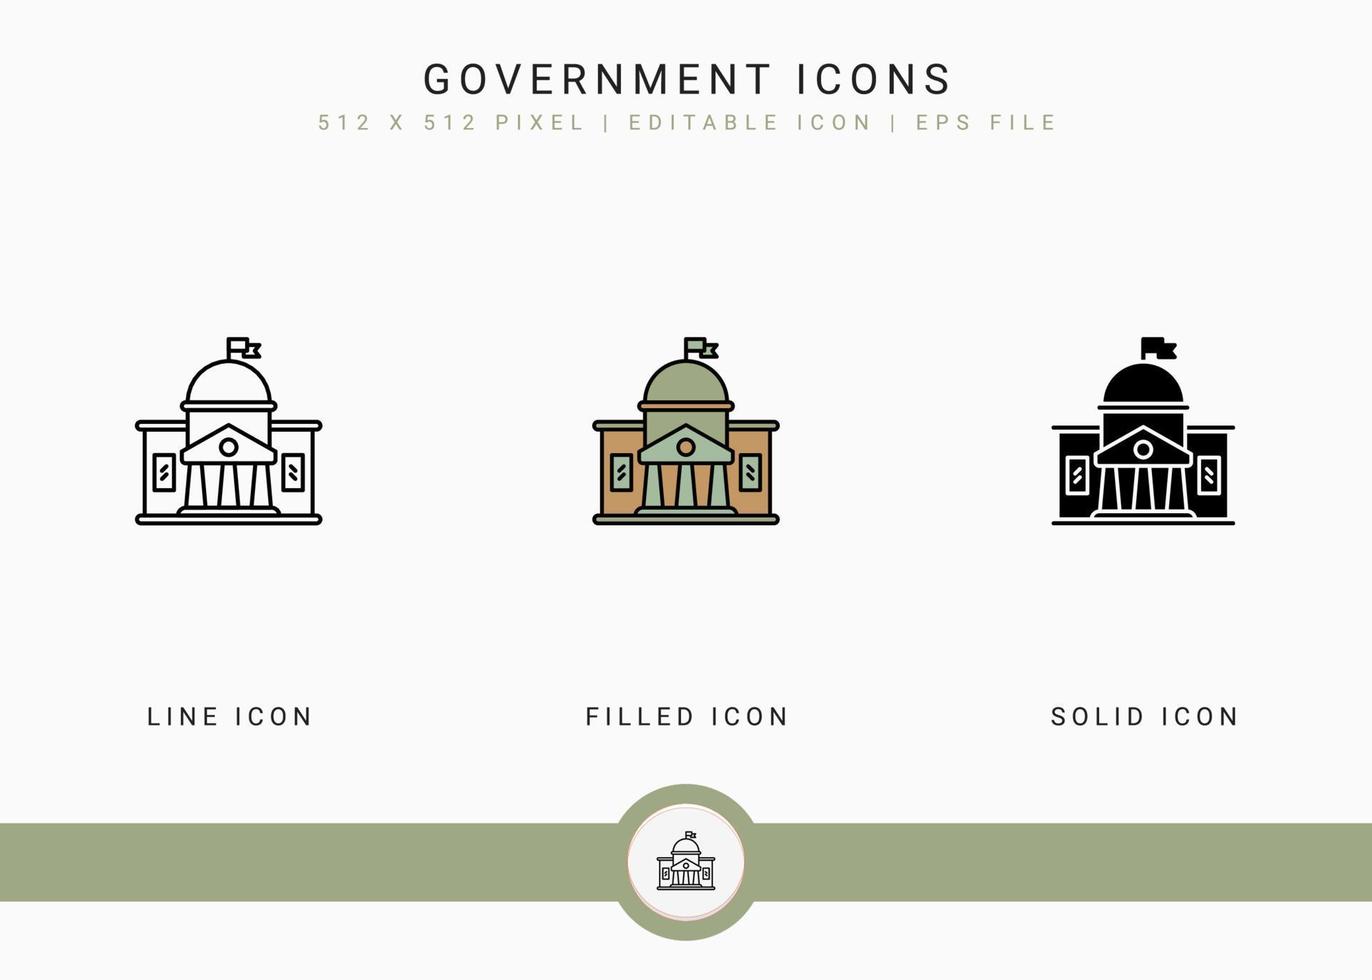 Government icons set vector illustration with solid icon line style. Politics public election concept. Editable stroke icon on isolated background for web design, user interface, and mobile app